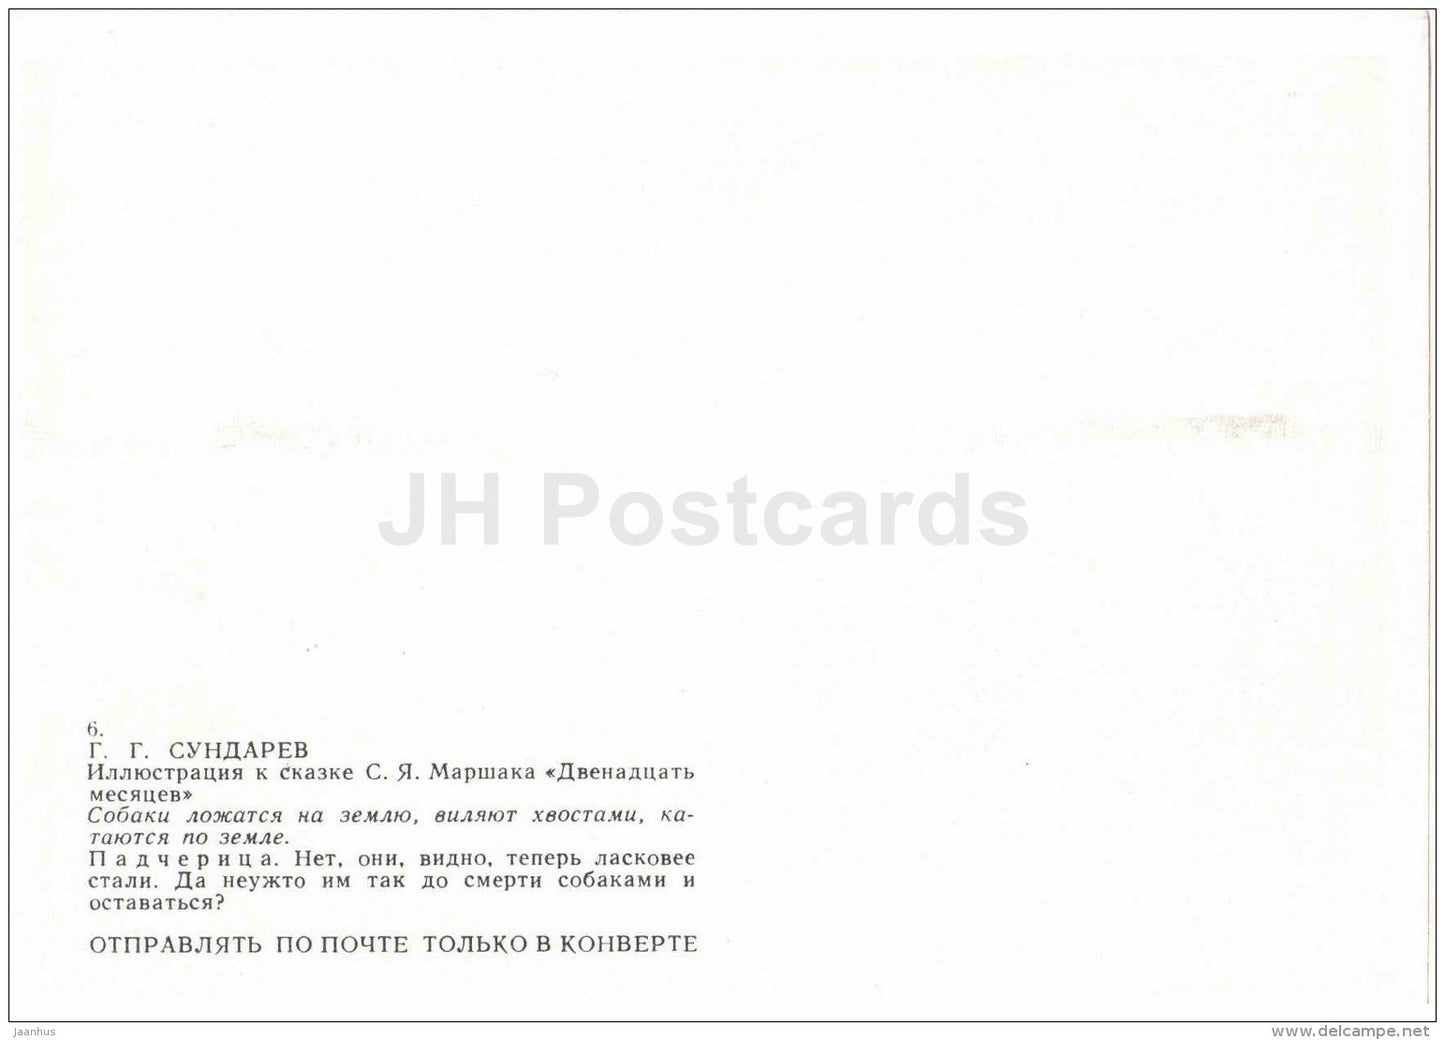 dogs - stepdaughter - horses - The Twelve Months - russian fairy tale by S. Marshak - 1985 - Russia USSR - unused - JH Postcards